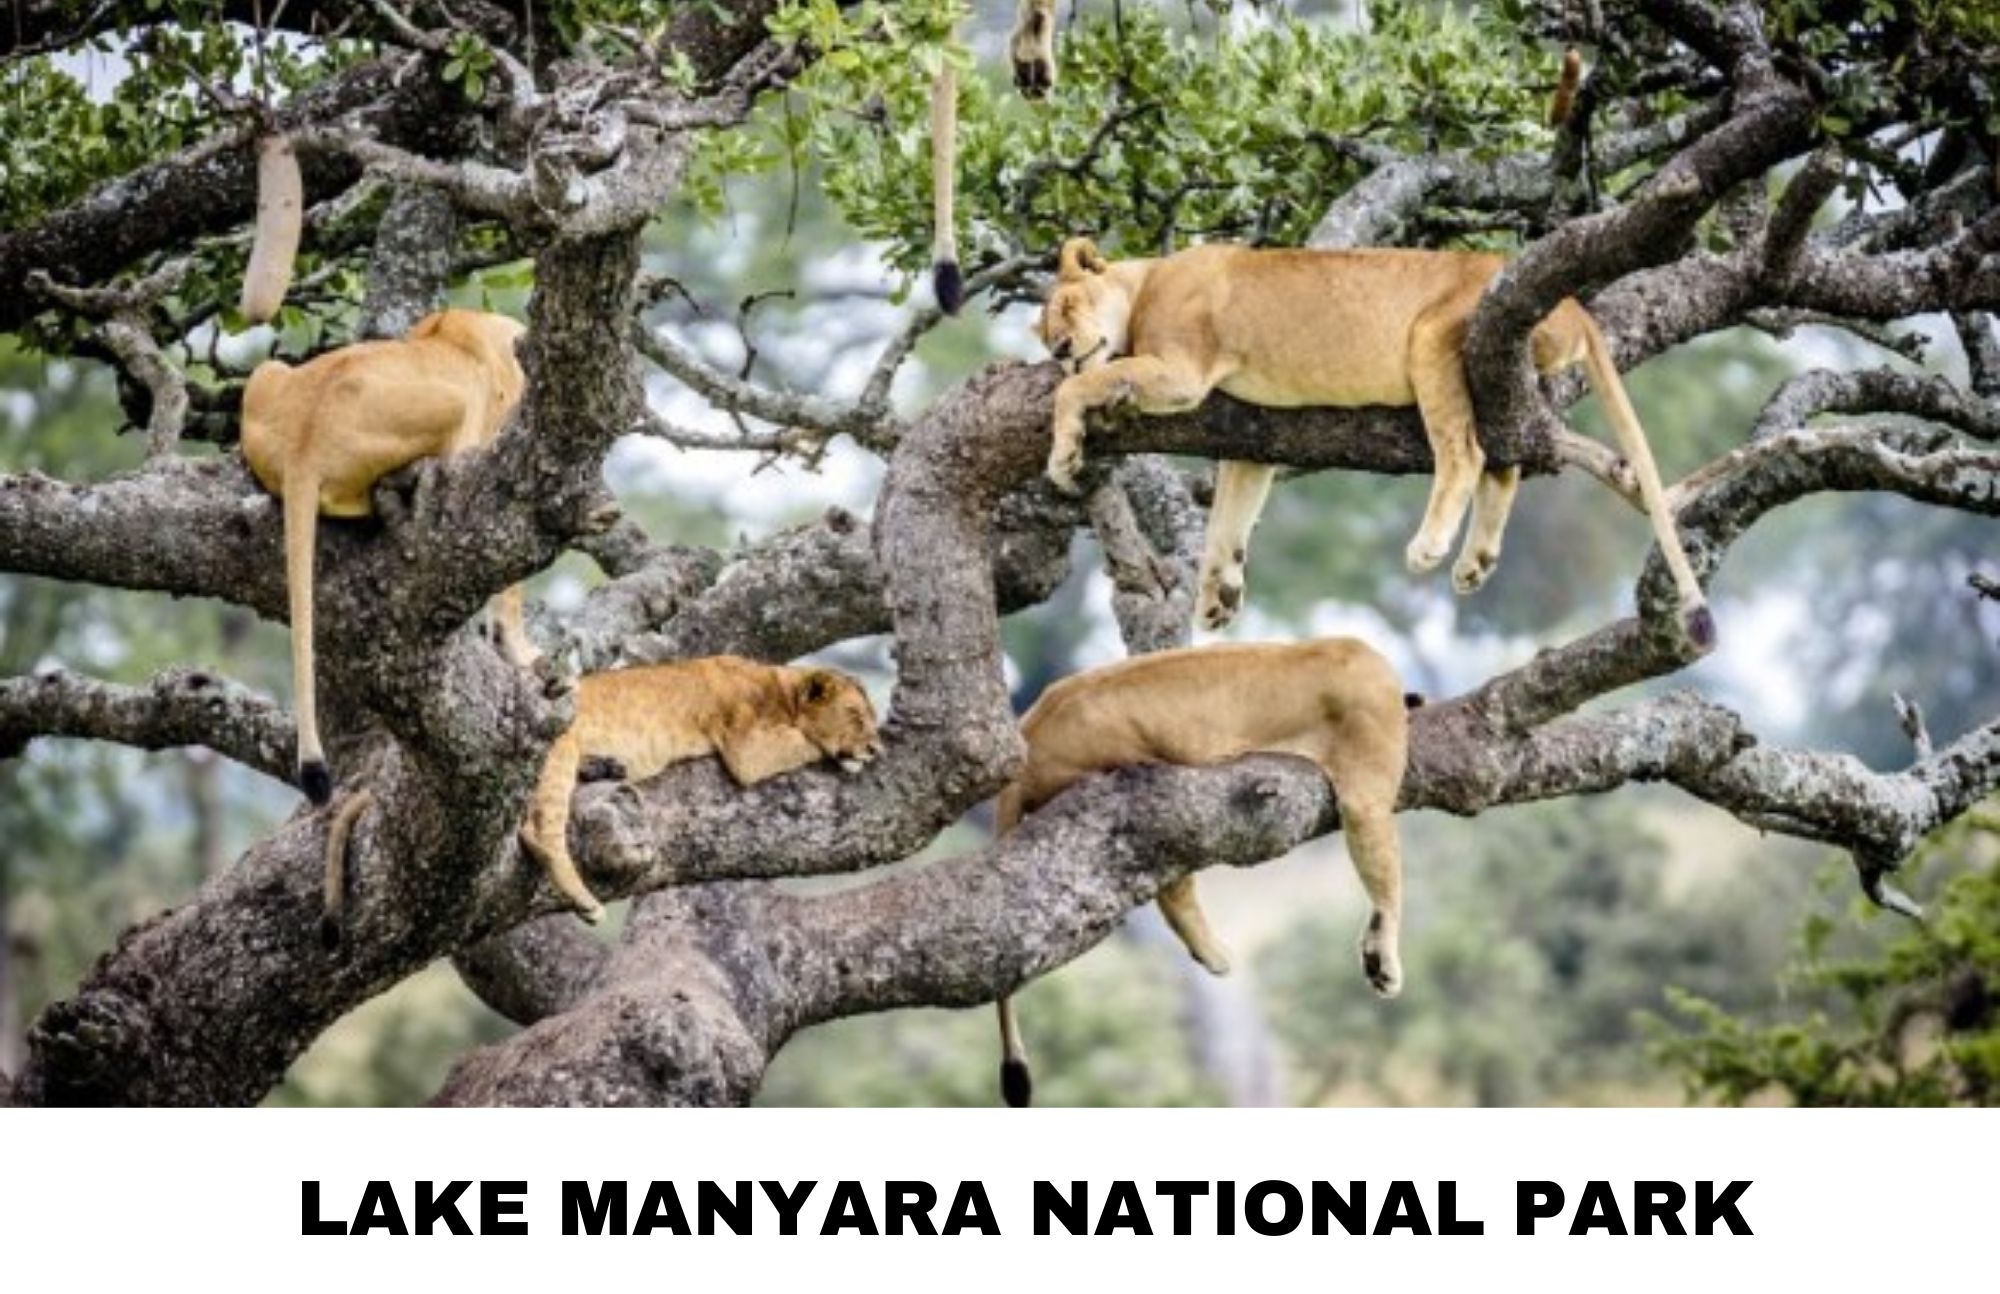 Lake Manyara National Park, with four sleeping lions on a tree branch